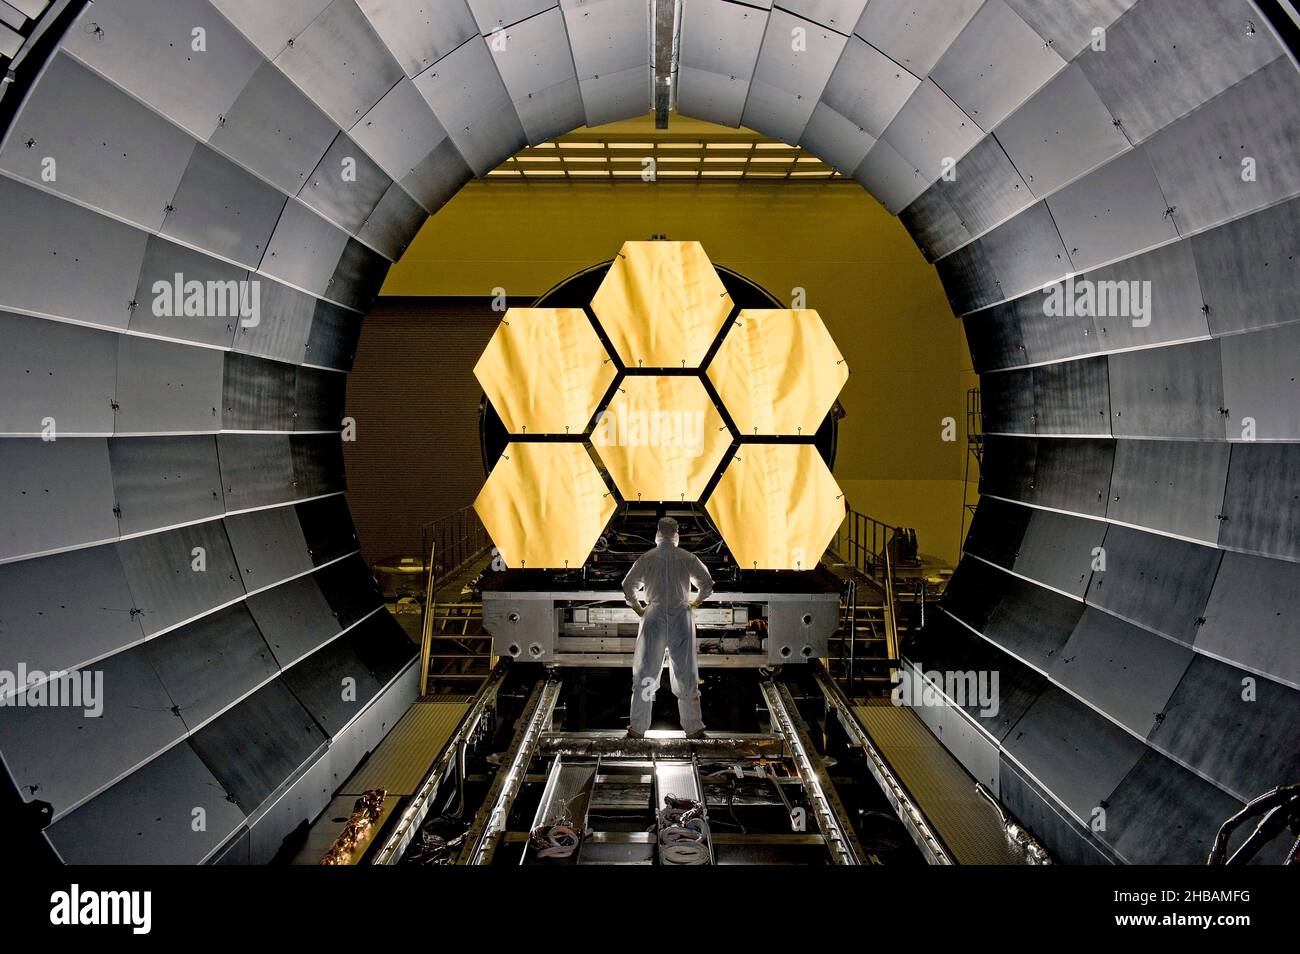 The James Webb Space Telescope is being jointly developed by NASA, the European Space Agency, and the Canadian Space Agency. It is planned to succeed the Hubble Space Telescope as NASA's flagship astrophysics mission. The telescope mirrors as they sit just outside the testing chamber in the X-ray Calibration Facility at Marshall Space Flight Center, Huntsville, Alabama, USA. Primary Mirror Segment Cryogenic Testing Ê Image Credit: NASA/MSFC/D.Higginbotham Editorial Use only. Stock Photo